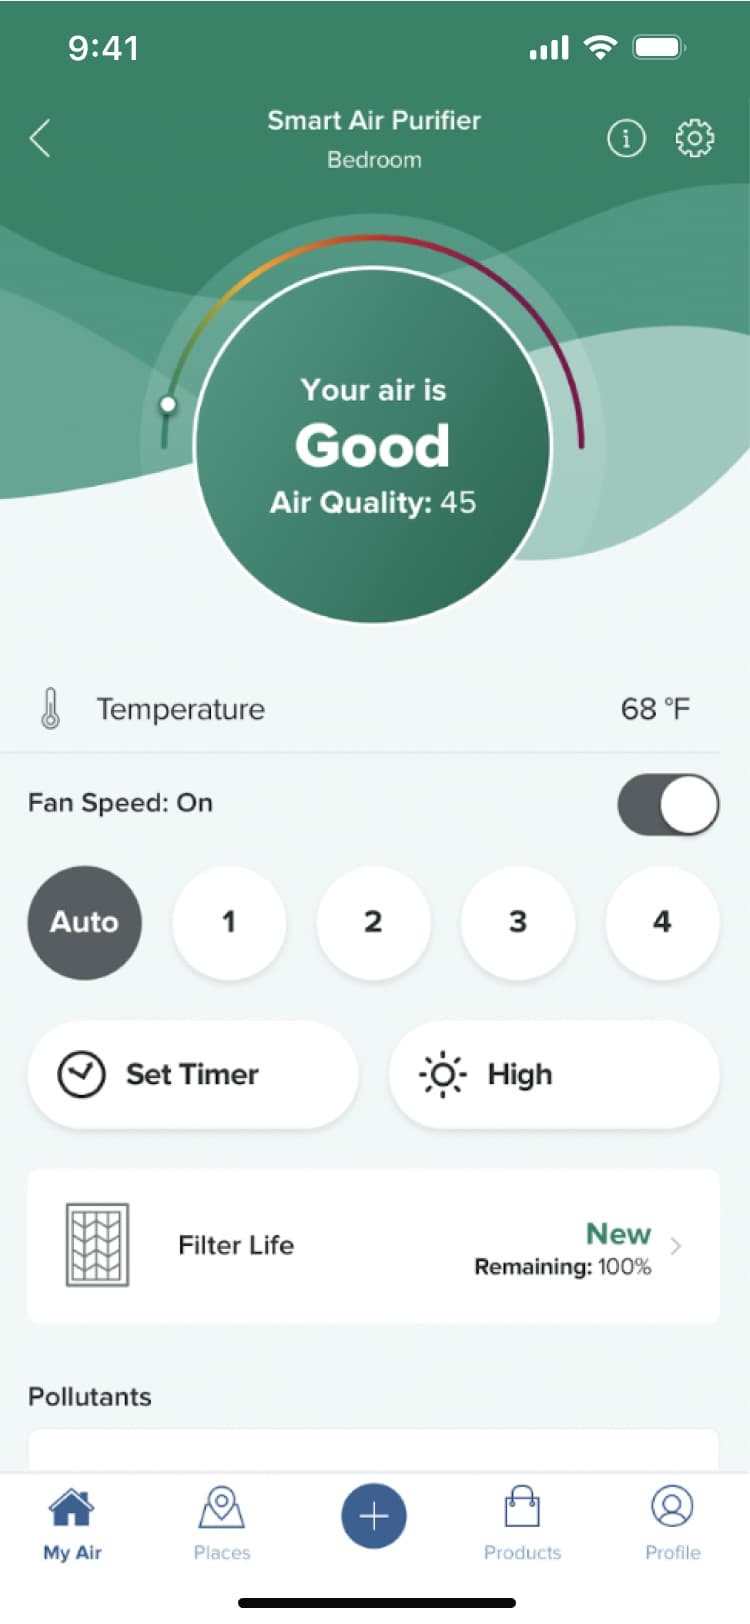 Screenshot of a 3M Filtrete app showing air quality as "Good" with a score of 45, temperature at 68°F, fan speed options, filter life, timer settings, and a section for pollutants.